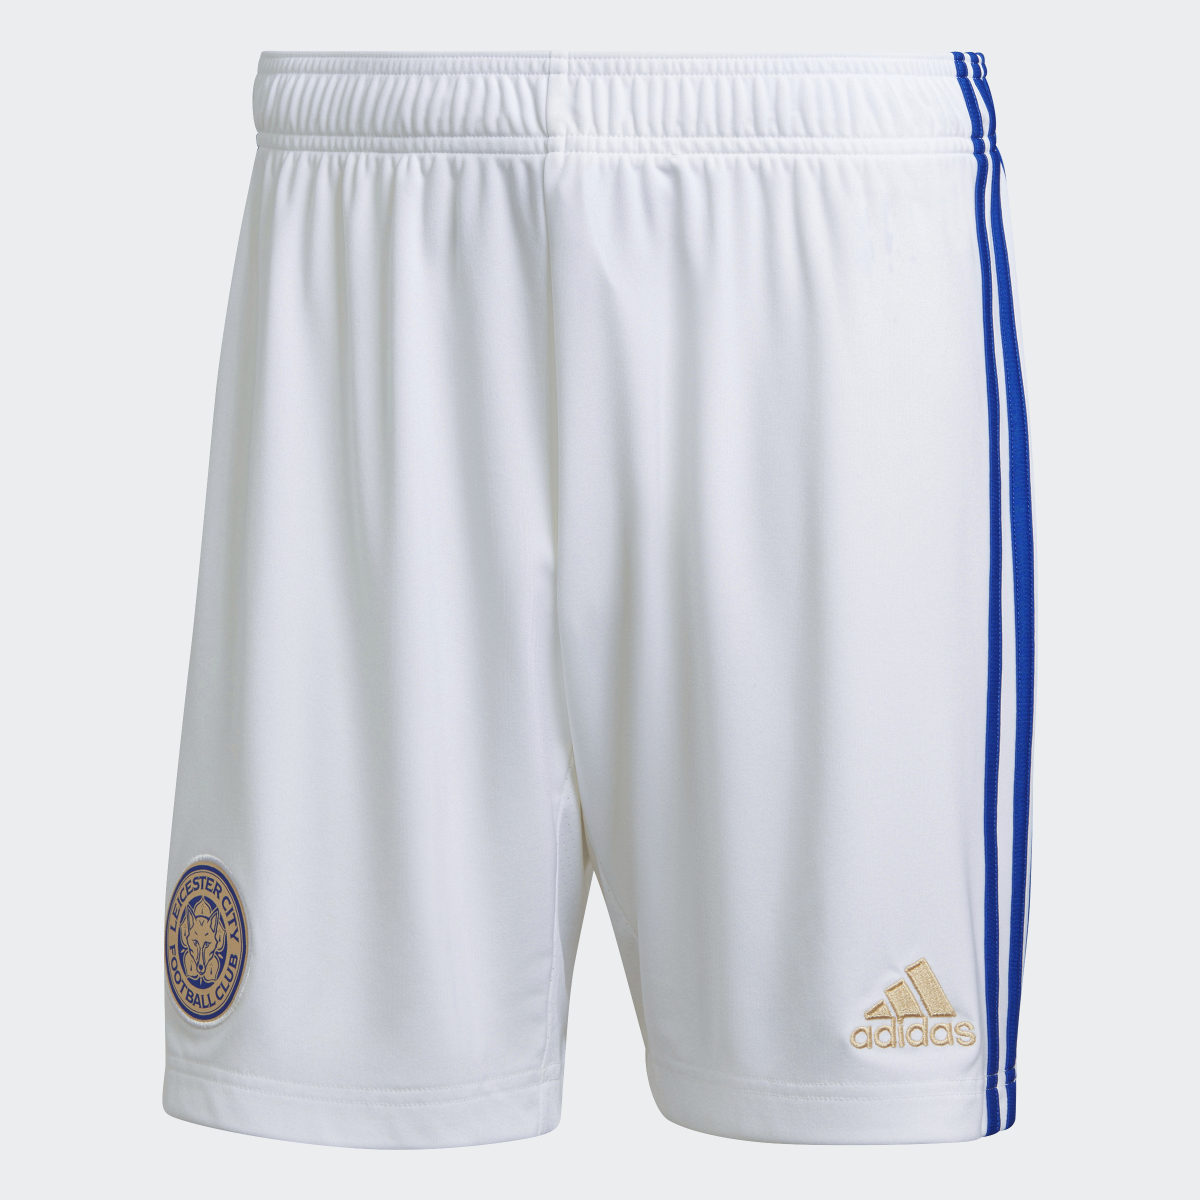 Adidas Short Home 22/23 Leicester City FC. 4